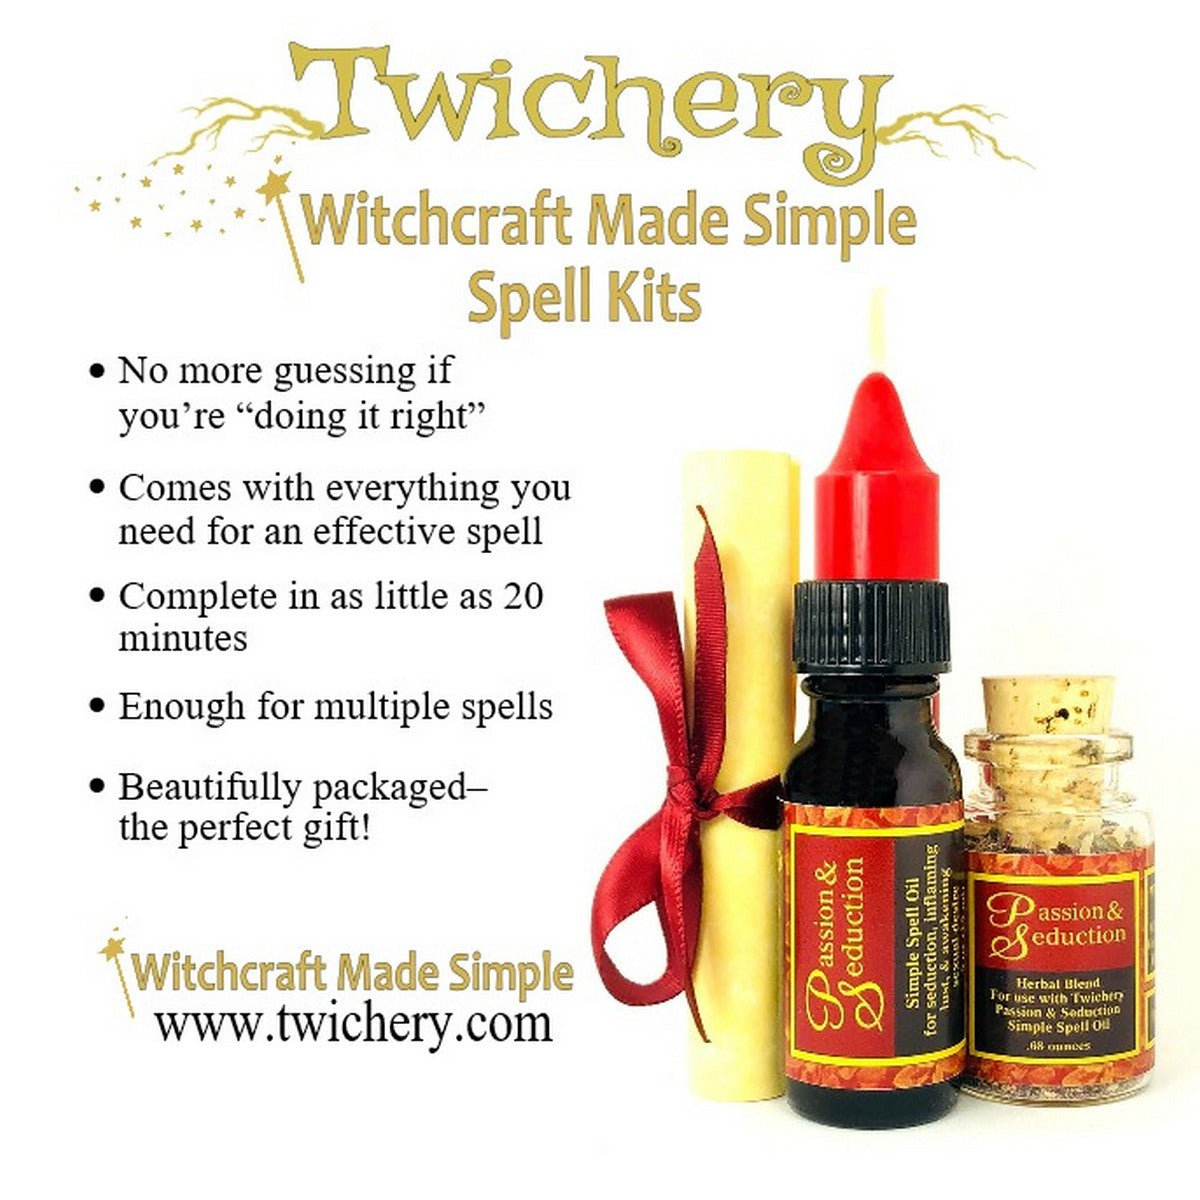 Twichery - Witchcraft Made Simple - Hoodoo Passion & Seduction - voodoo wicca pagan witchcraft